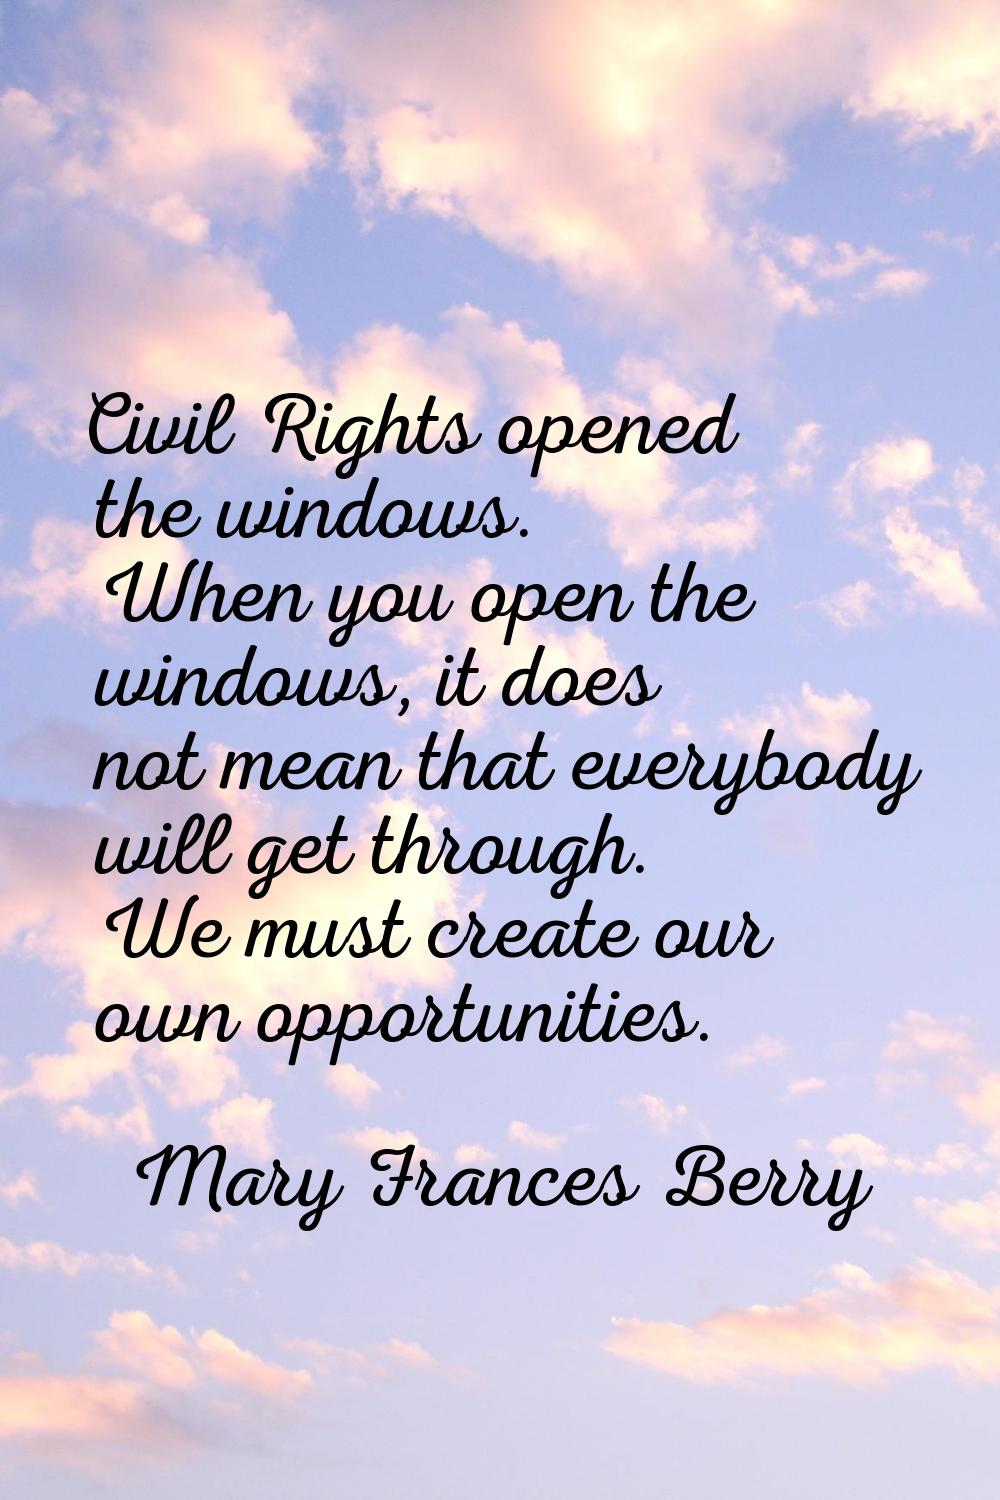 Civil Rights opened the windows. When you open the windows, it does not mean that everybody will ge